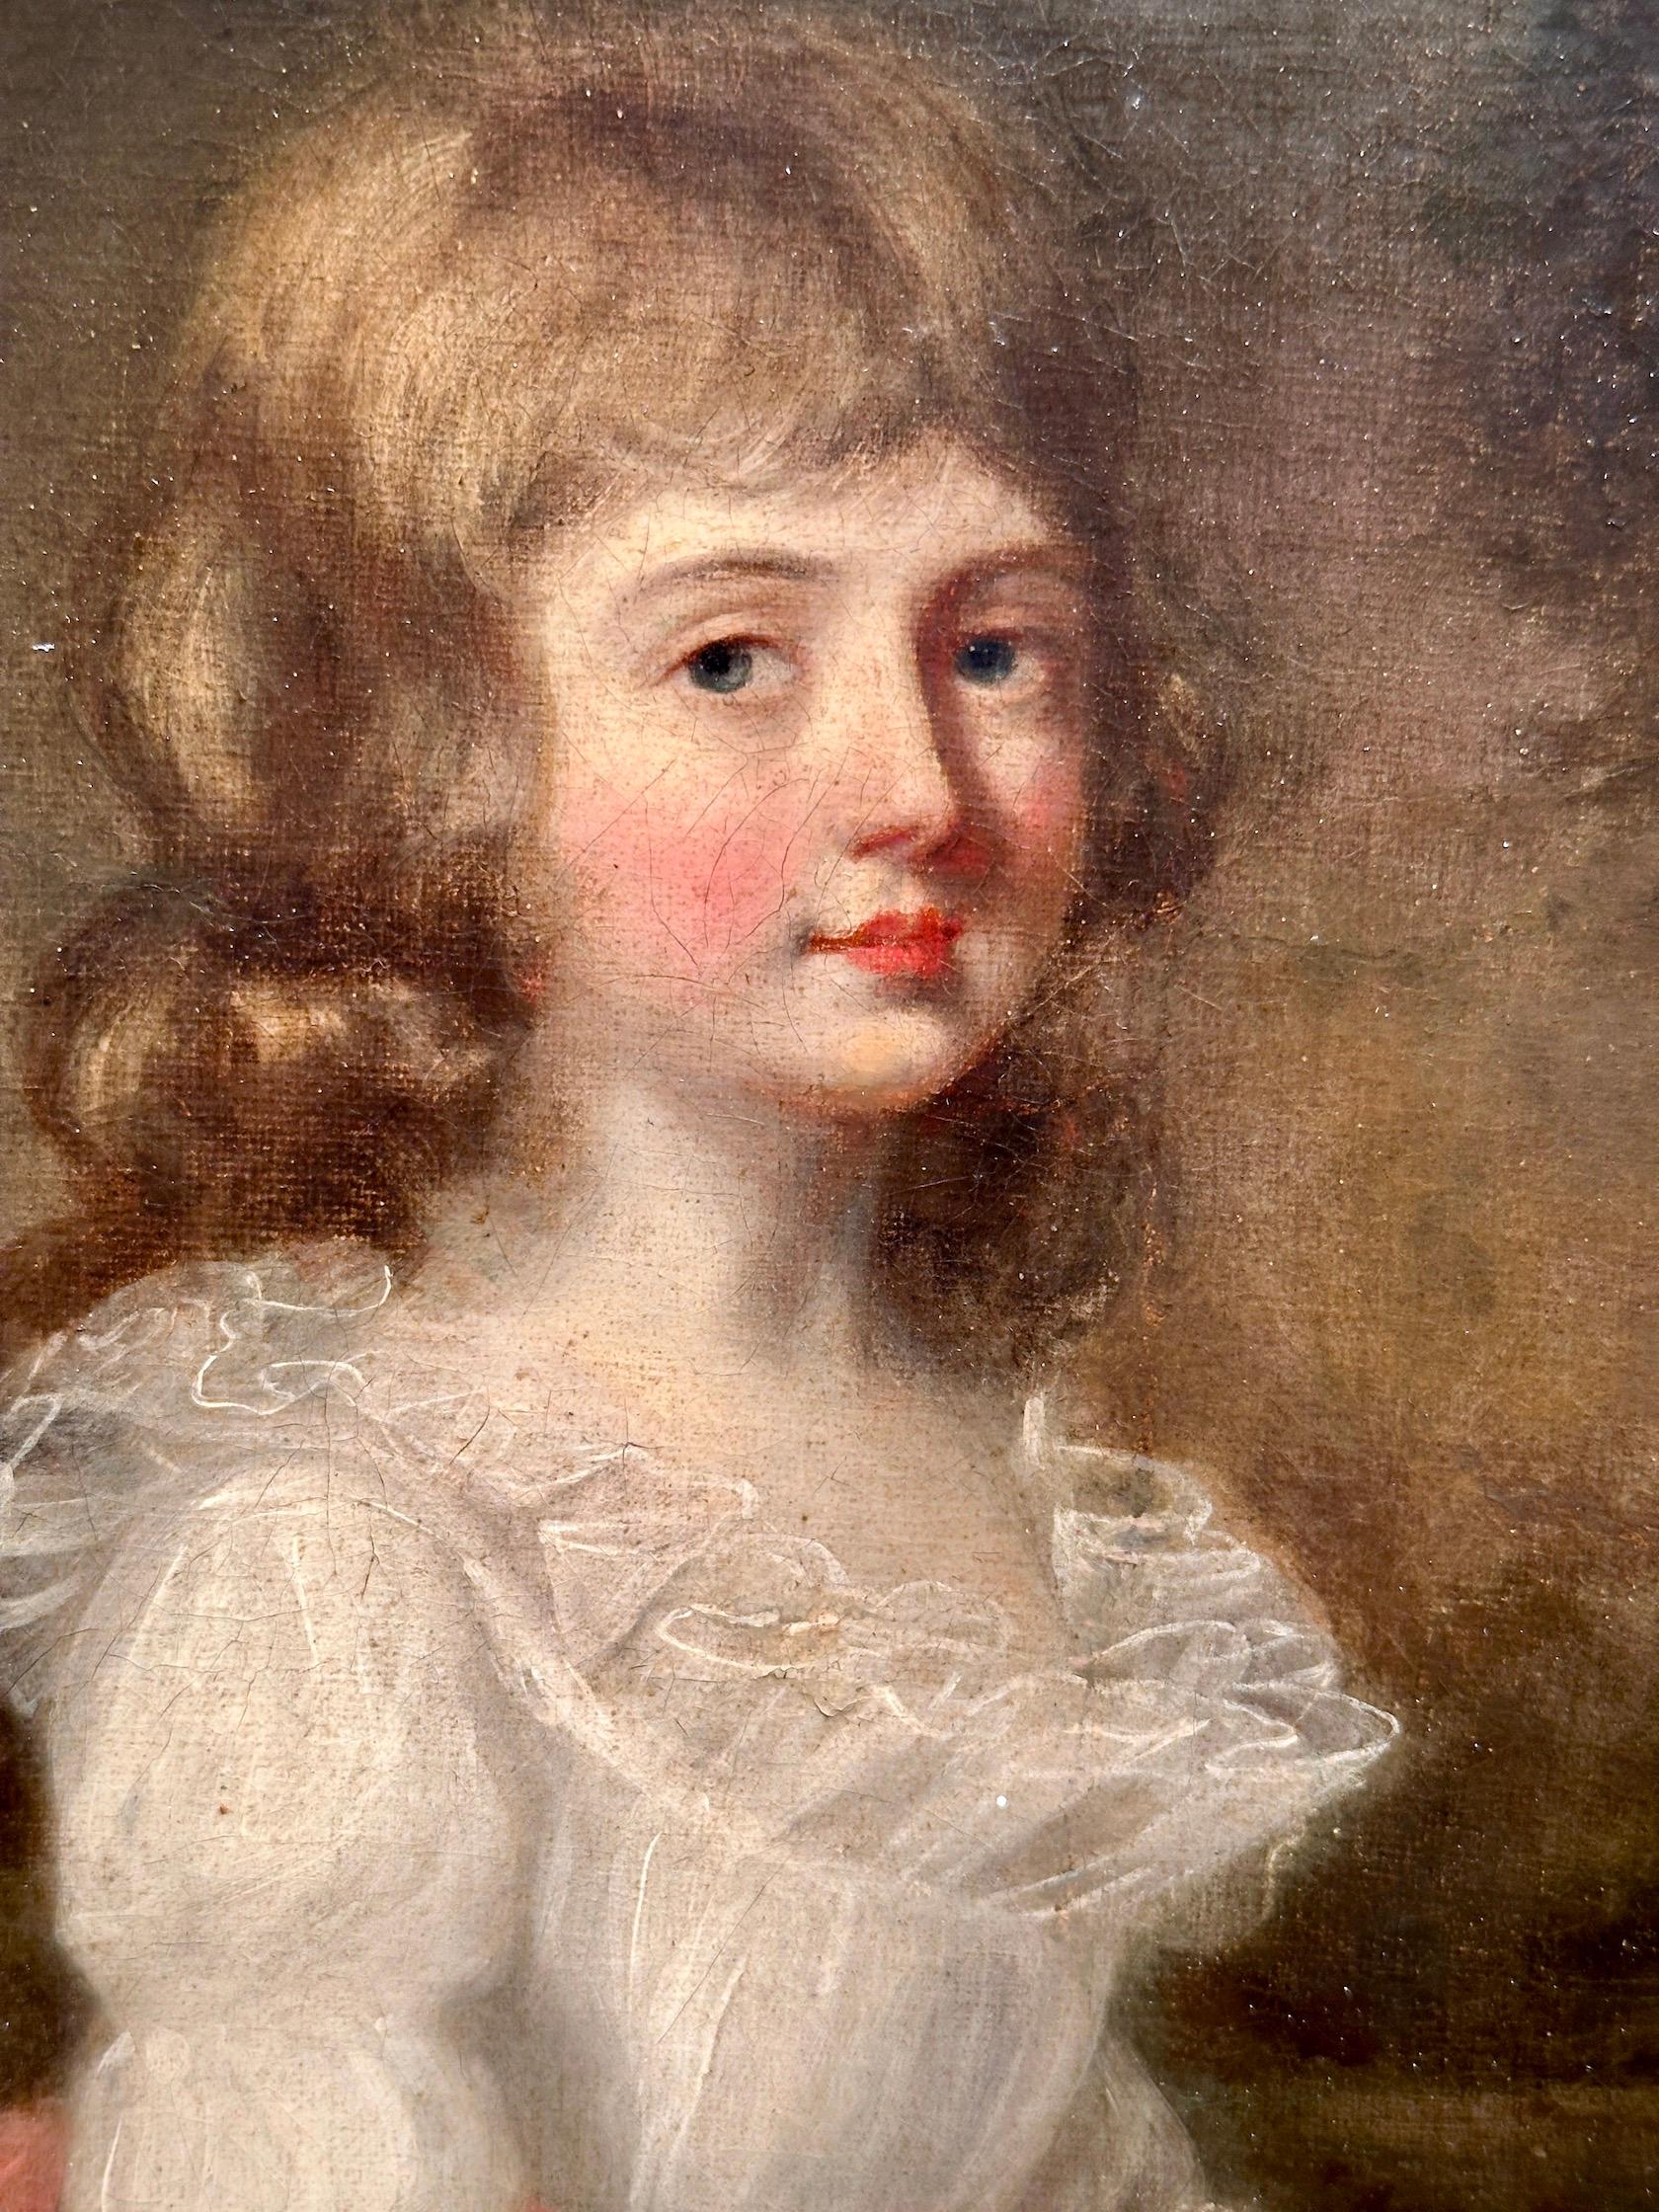 Portrait of a young British Girl, in her white dress with Pink Sash.

Choosing to acquire an 18th-century portrait of a young girl by English artist John Russell is an opportunity to own a captivating piece of historical portraiture that captures